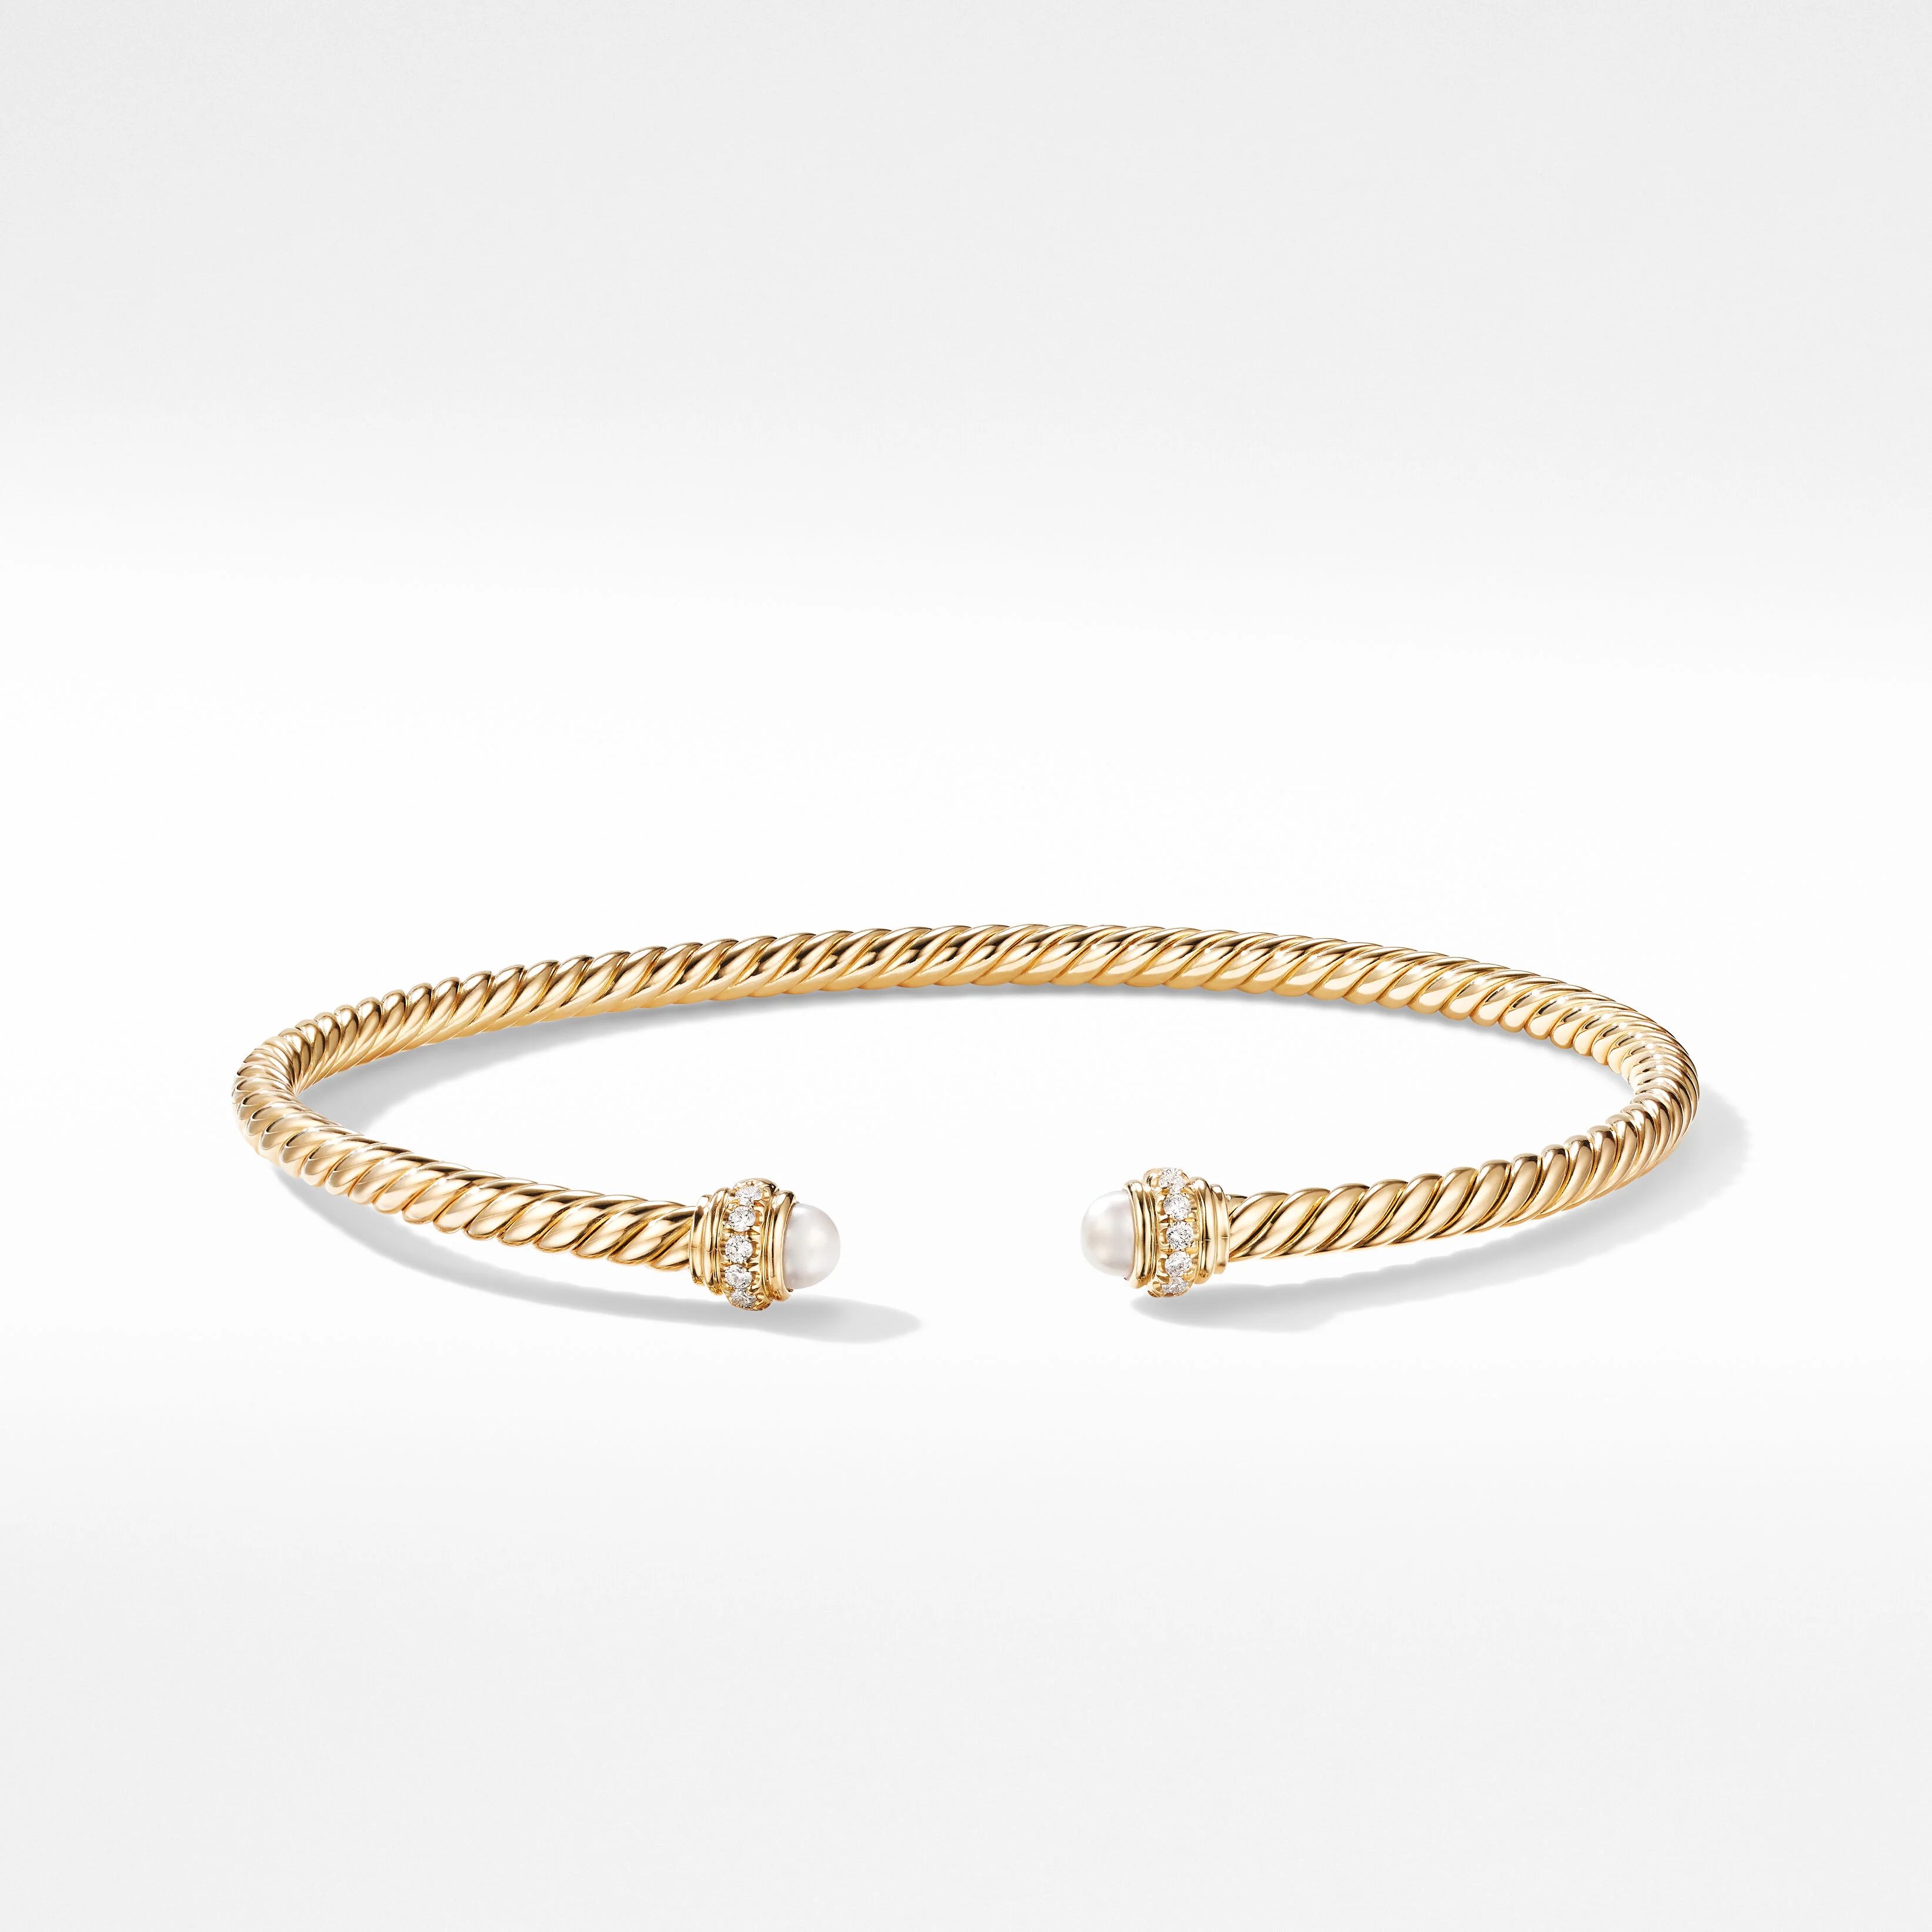 Cablespira® Color Bracelet in 18K Yellow Gold with Pearls and Pavé Diamonds | David Yurman